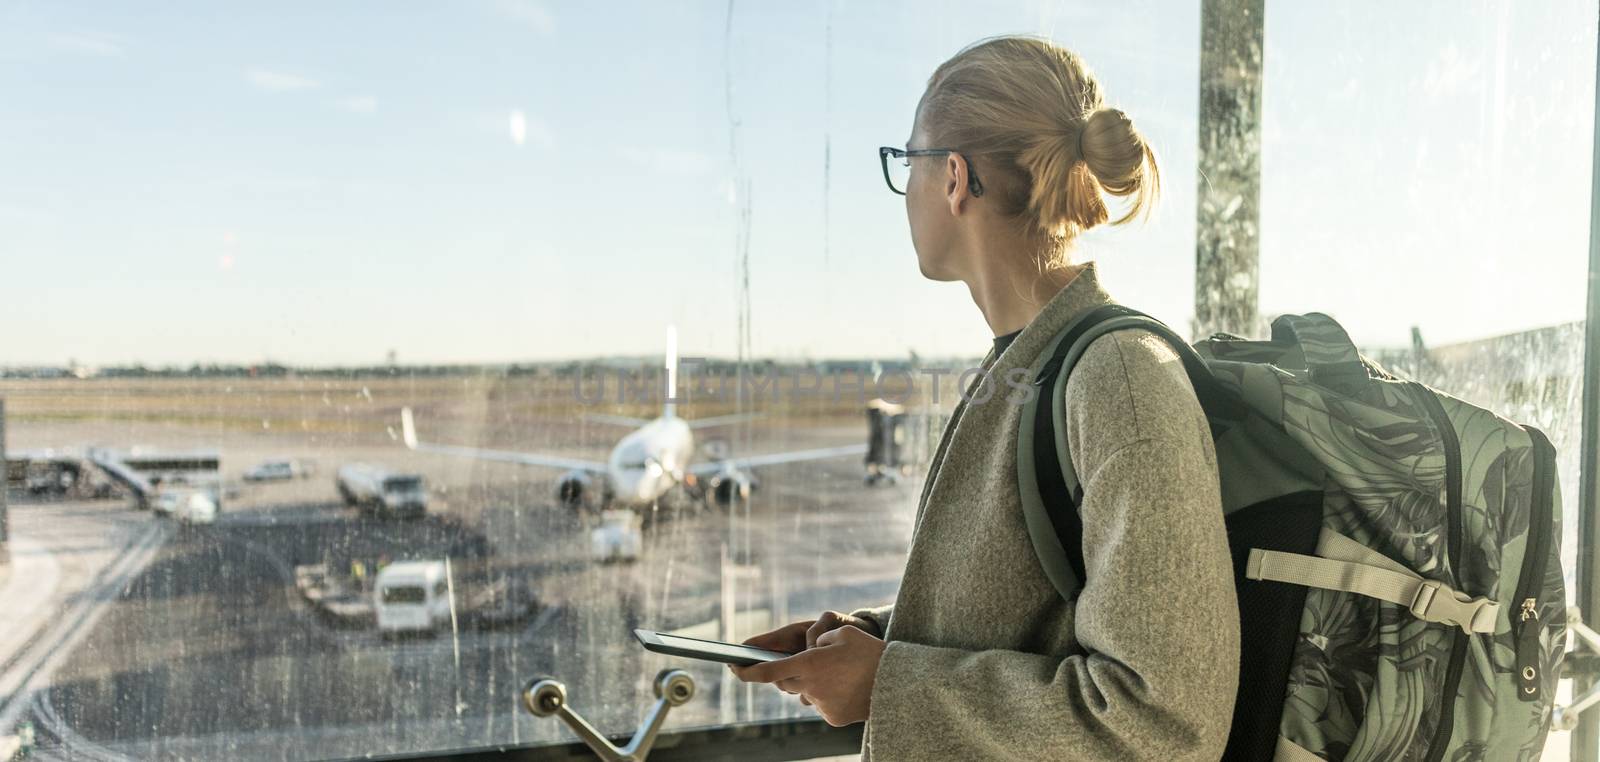 Young woman standing near airport gates window holding cellphone in her hands, wearing travel backpack and walking to lounge area. Female traveler search online map at the airport by kasto